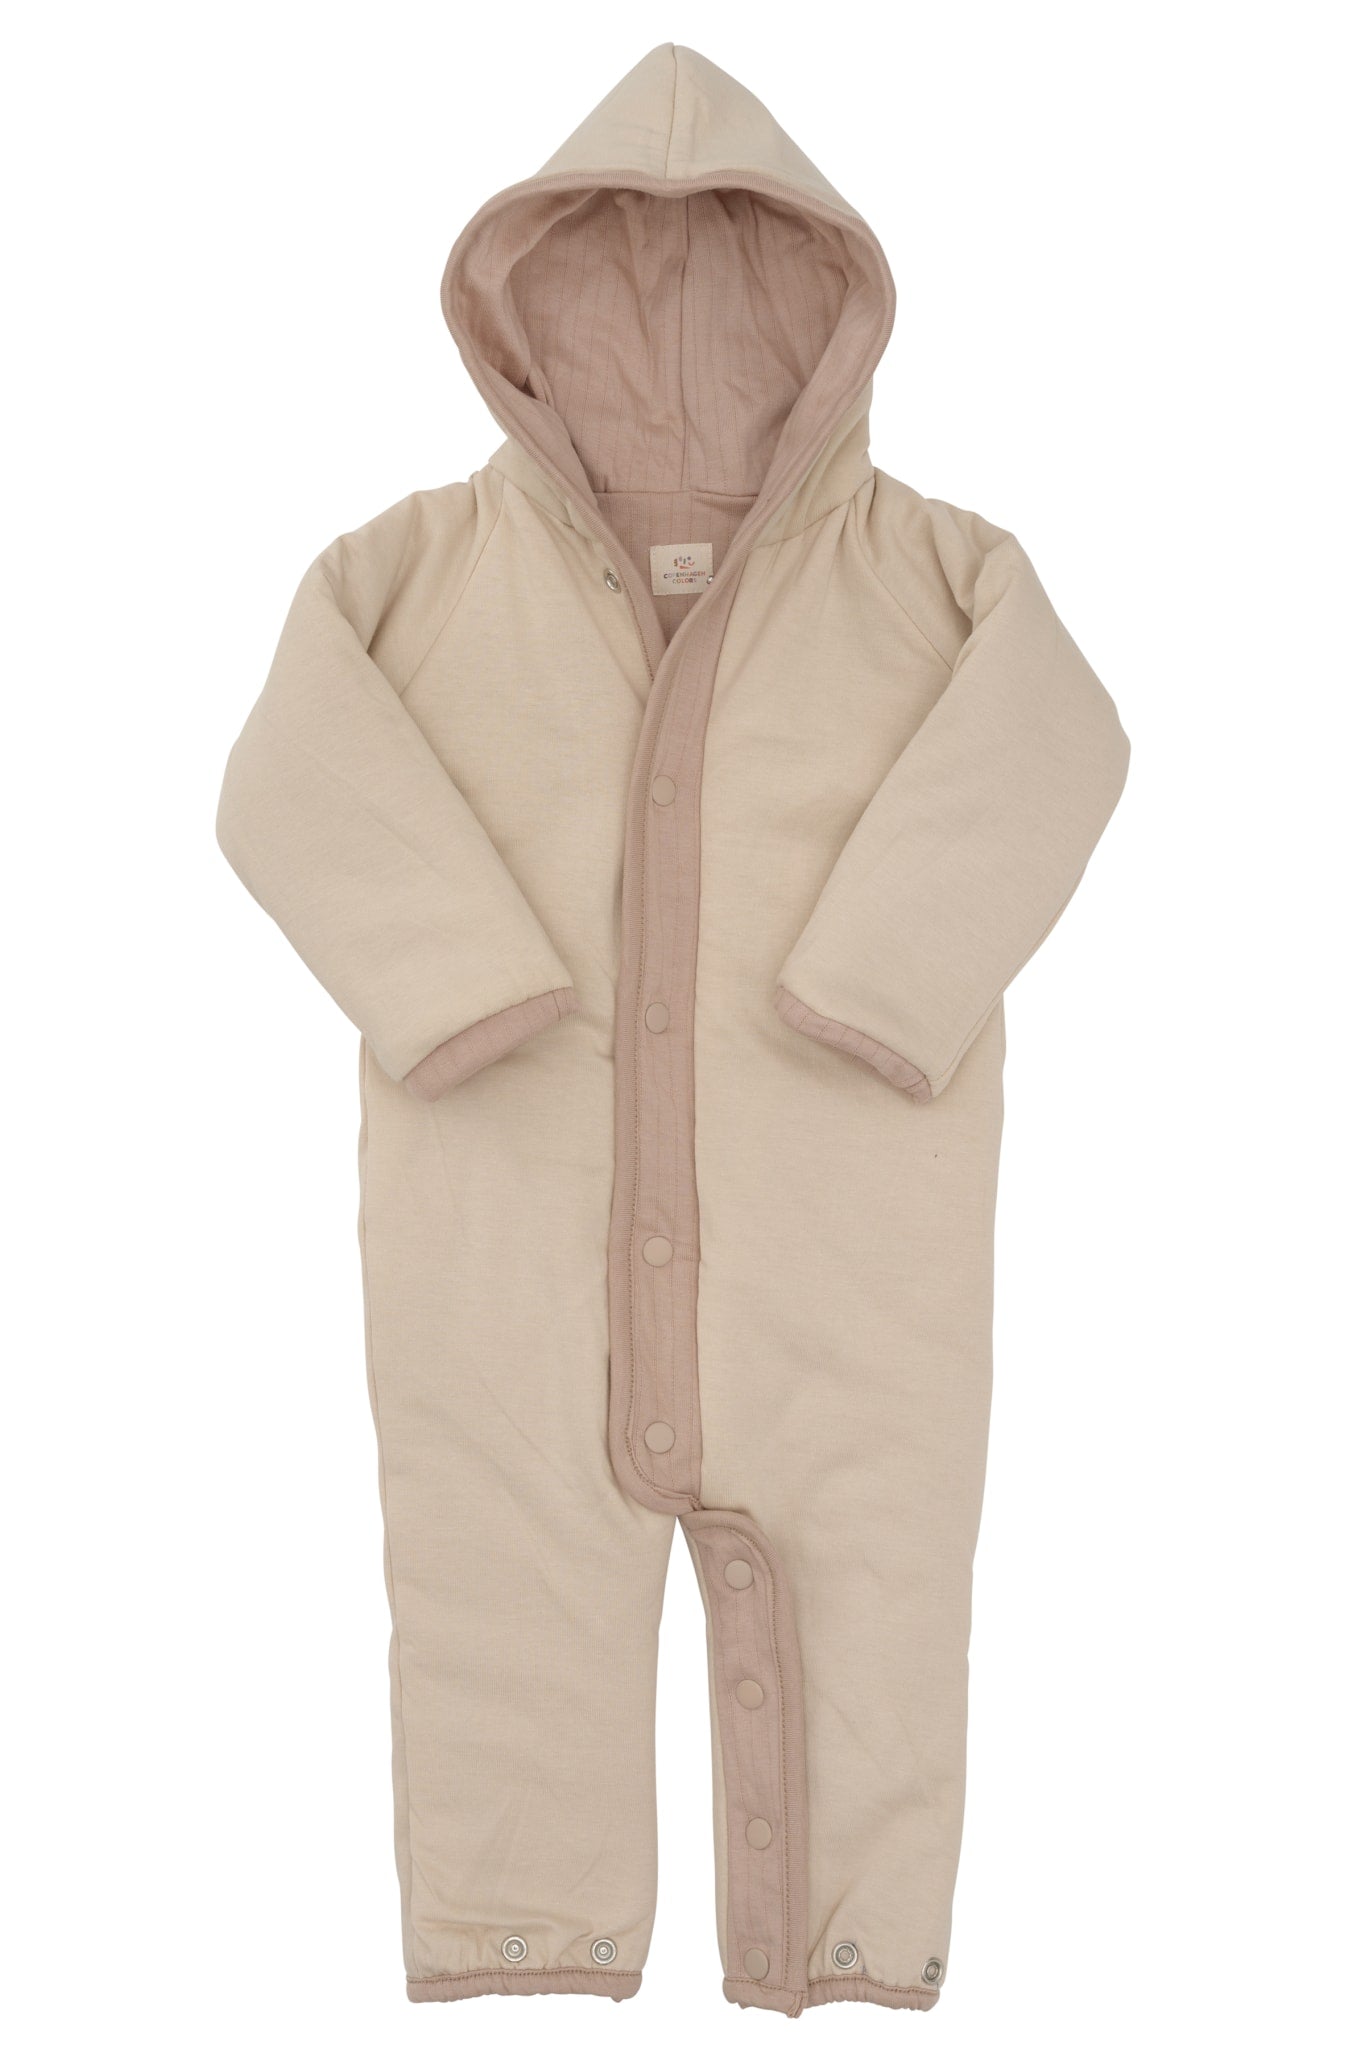 QUILTED REVERSIBLE FULL BODY AND SLEEPING BAG - LT TAUPE CREAM COMB